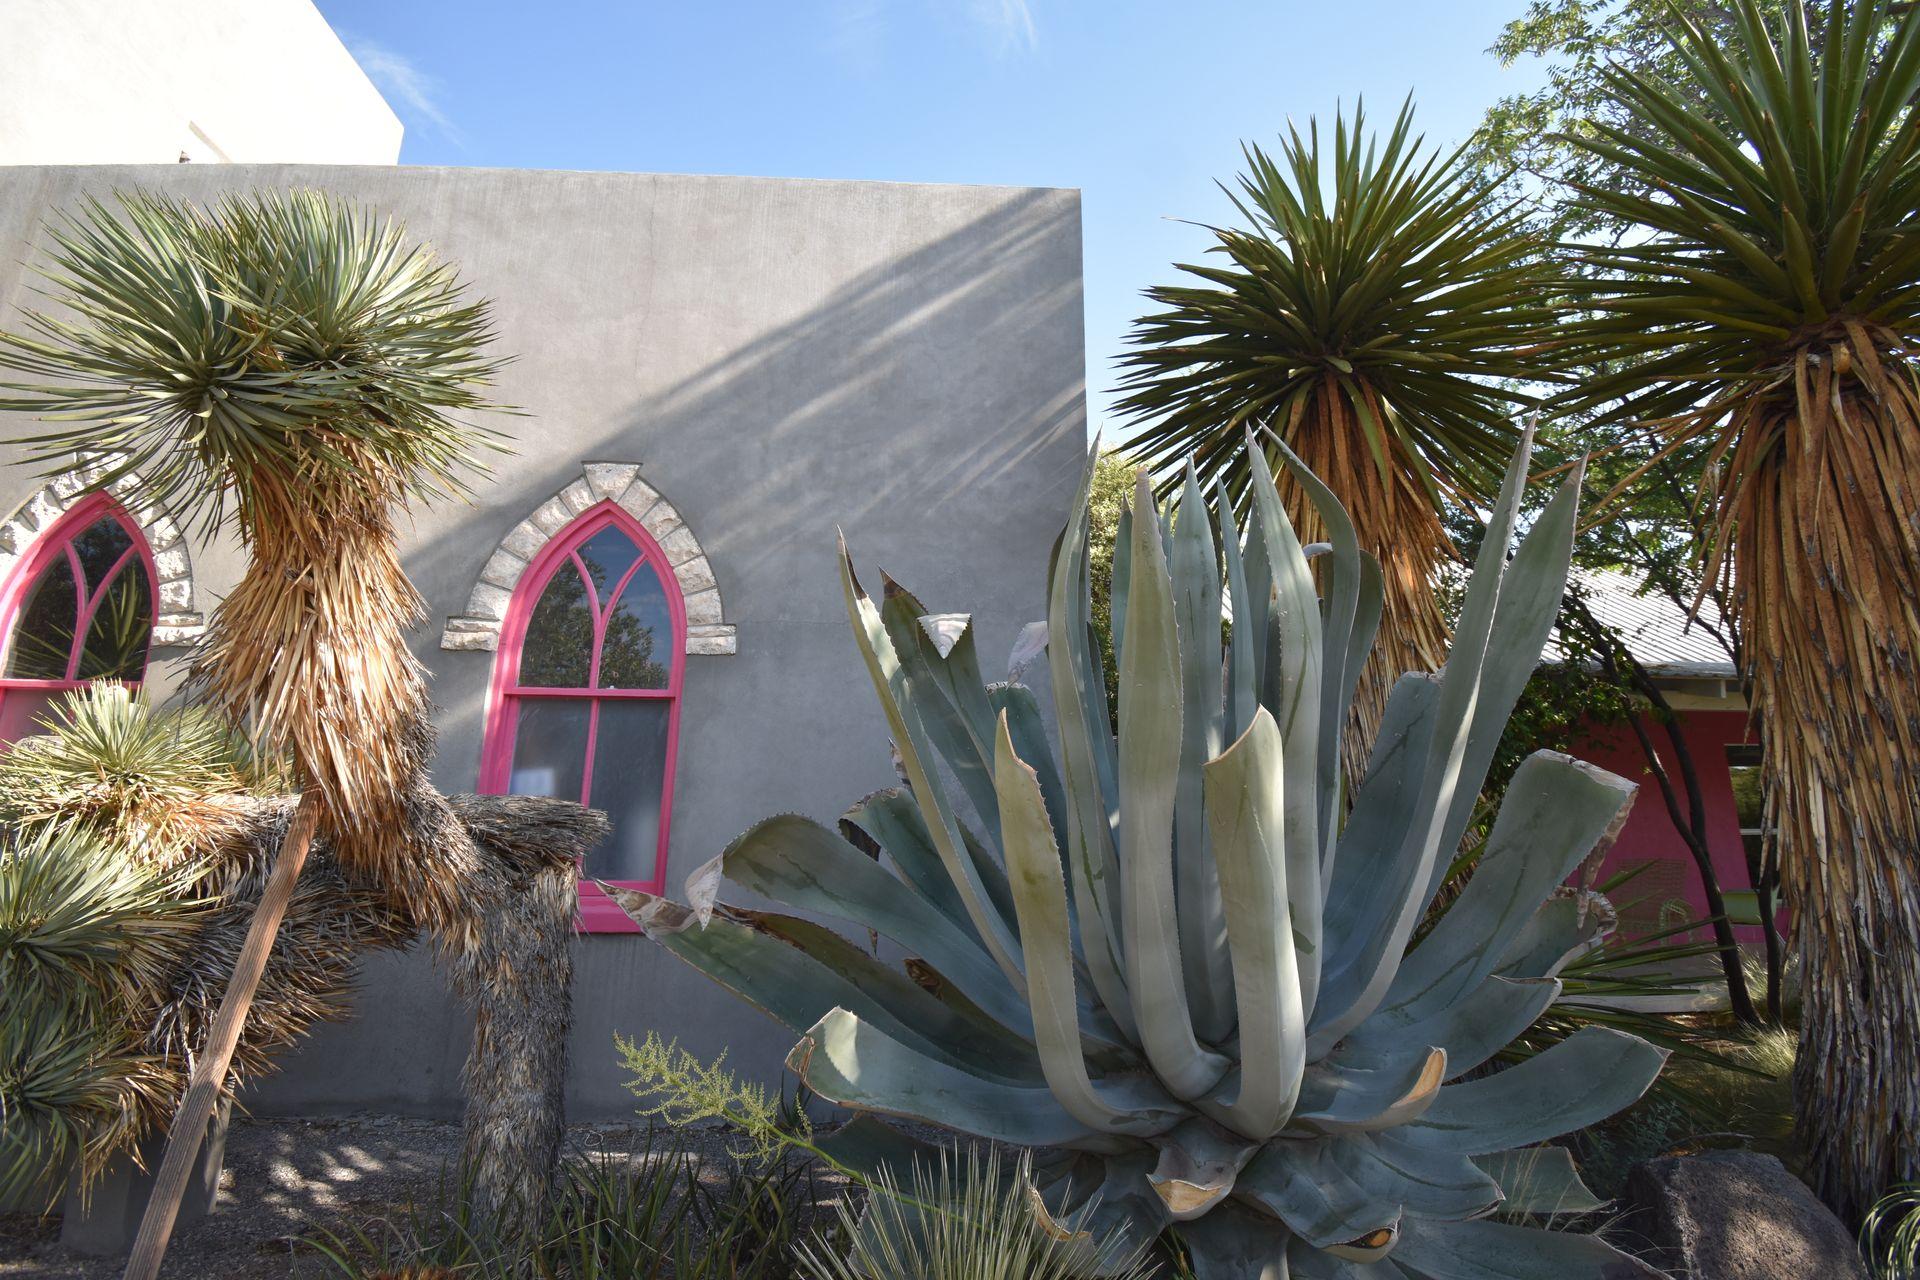 A gray store with a pink window. There is a large cactus and some palm trees in front of the building.